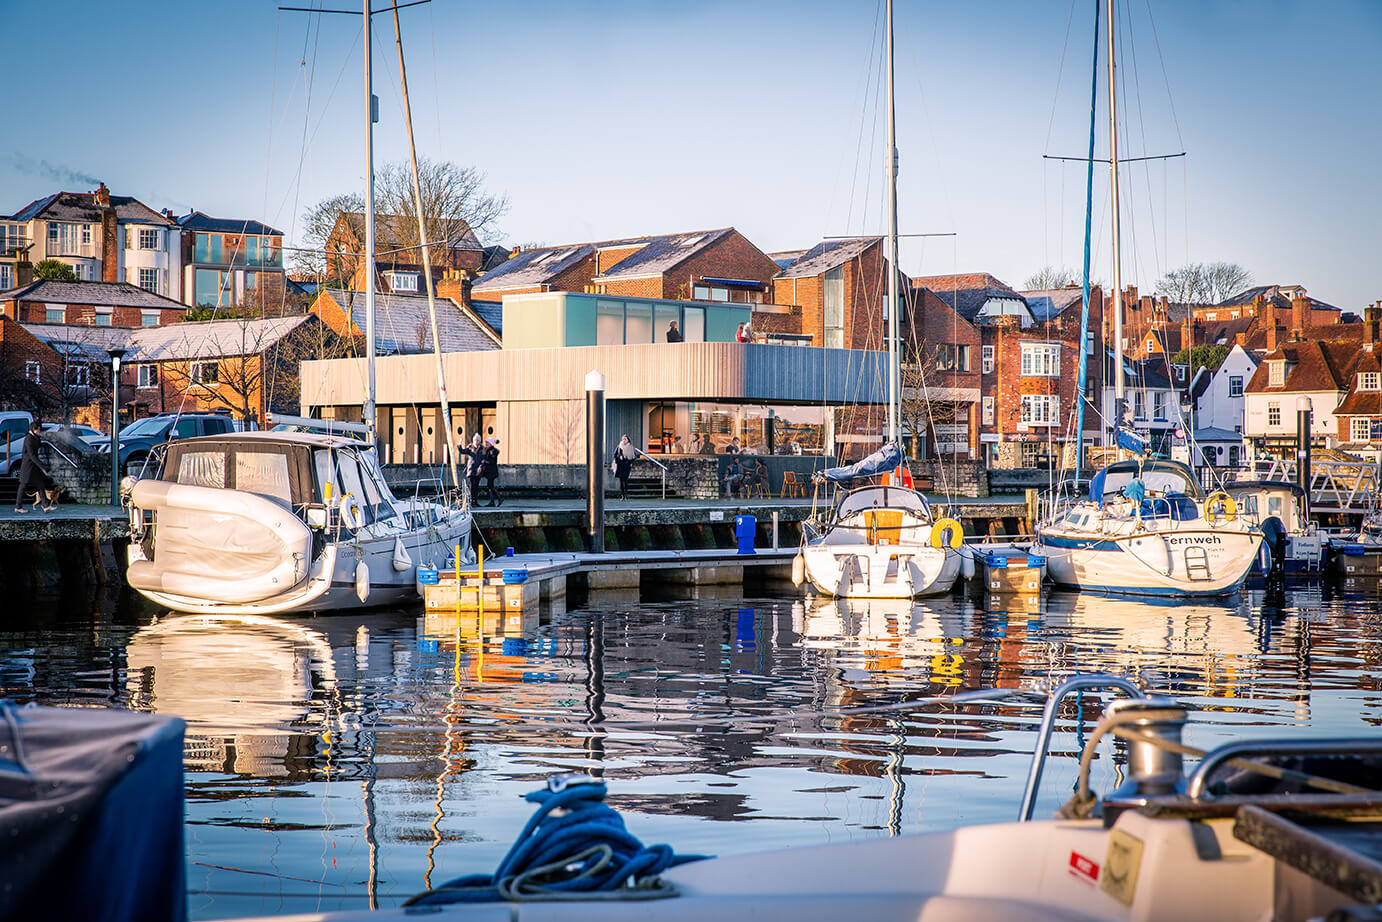 Lymington Quay submitted for planning